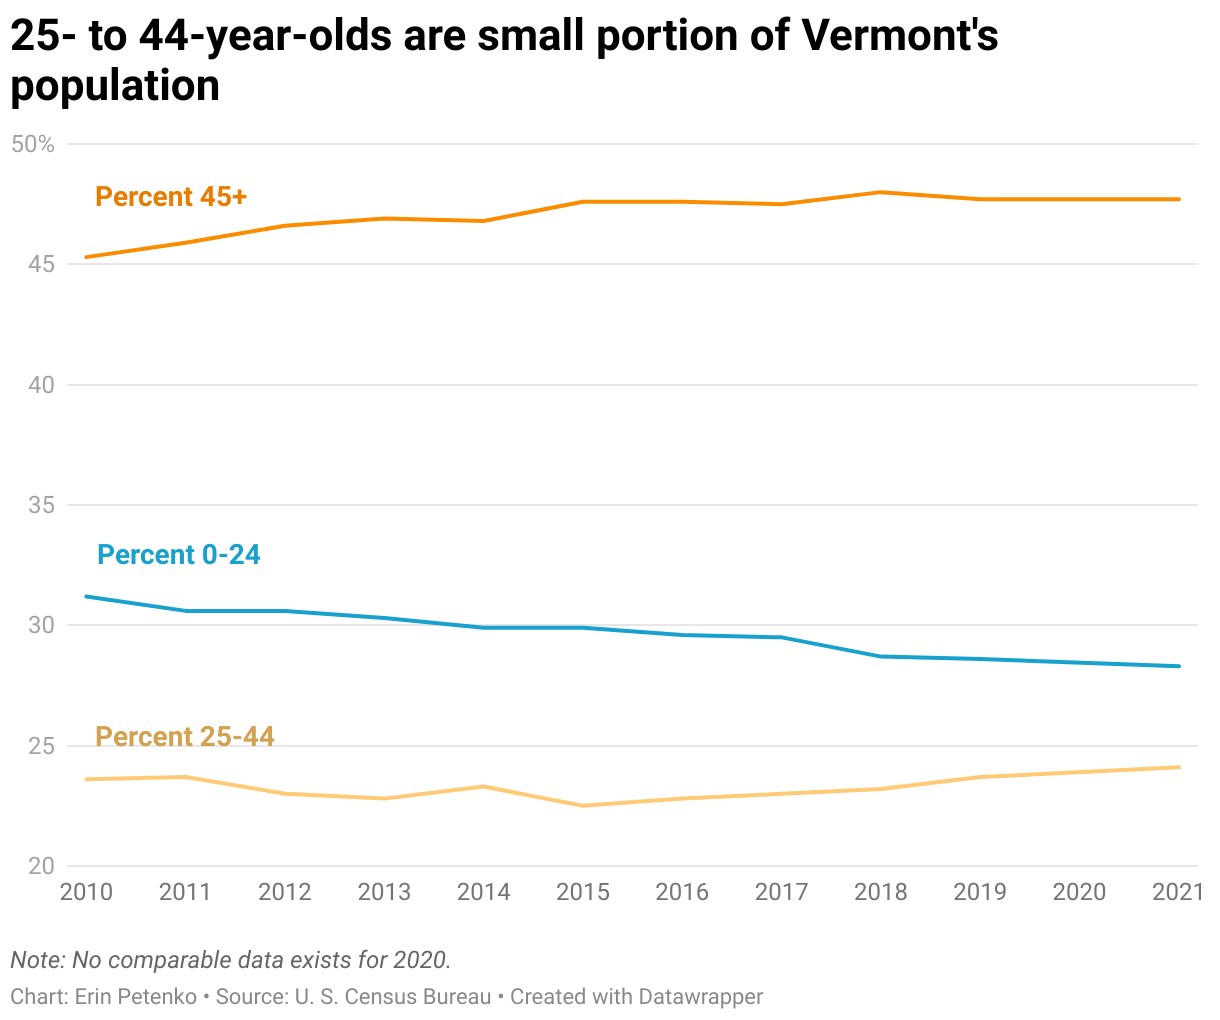 As of 2021, 28% of Vermonters were under the age of 25, 24% were 25 to 44 years old, and 48% were 45 and older.